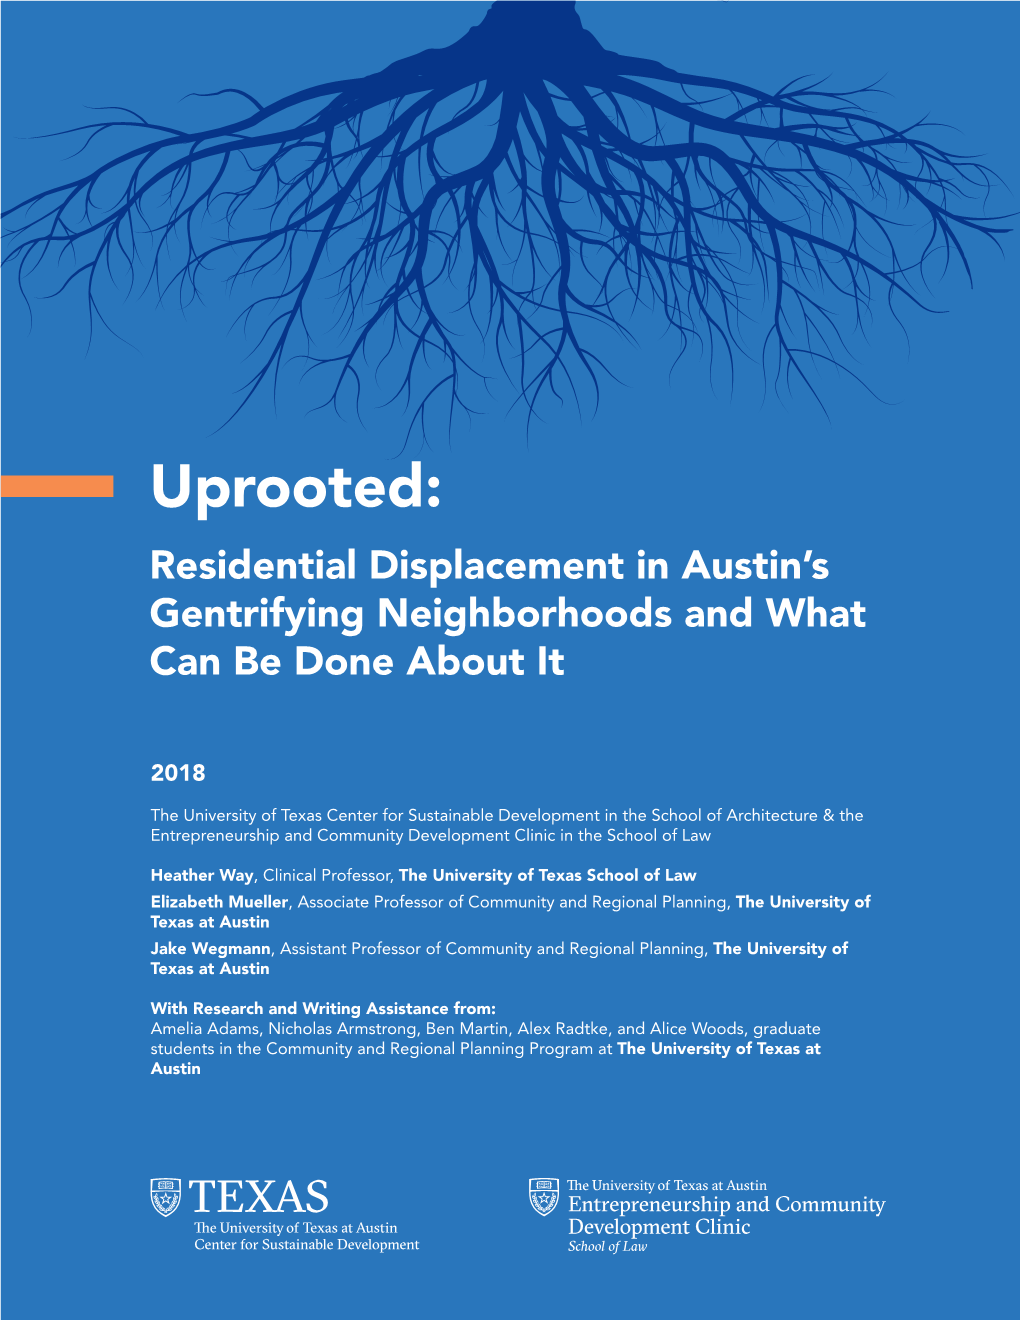 Uprooted: Residential Displacement in Austin's Gentrifying Neighborhoods, and What Can Be Done About